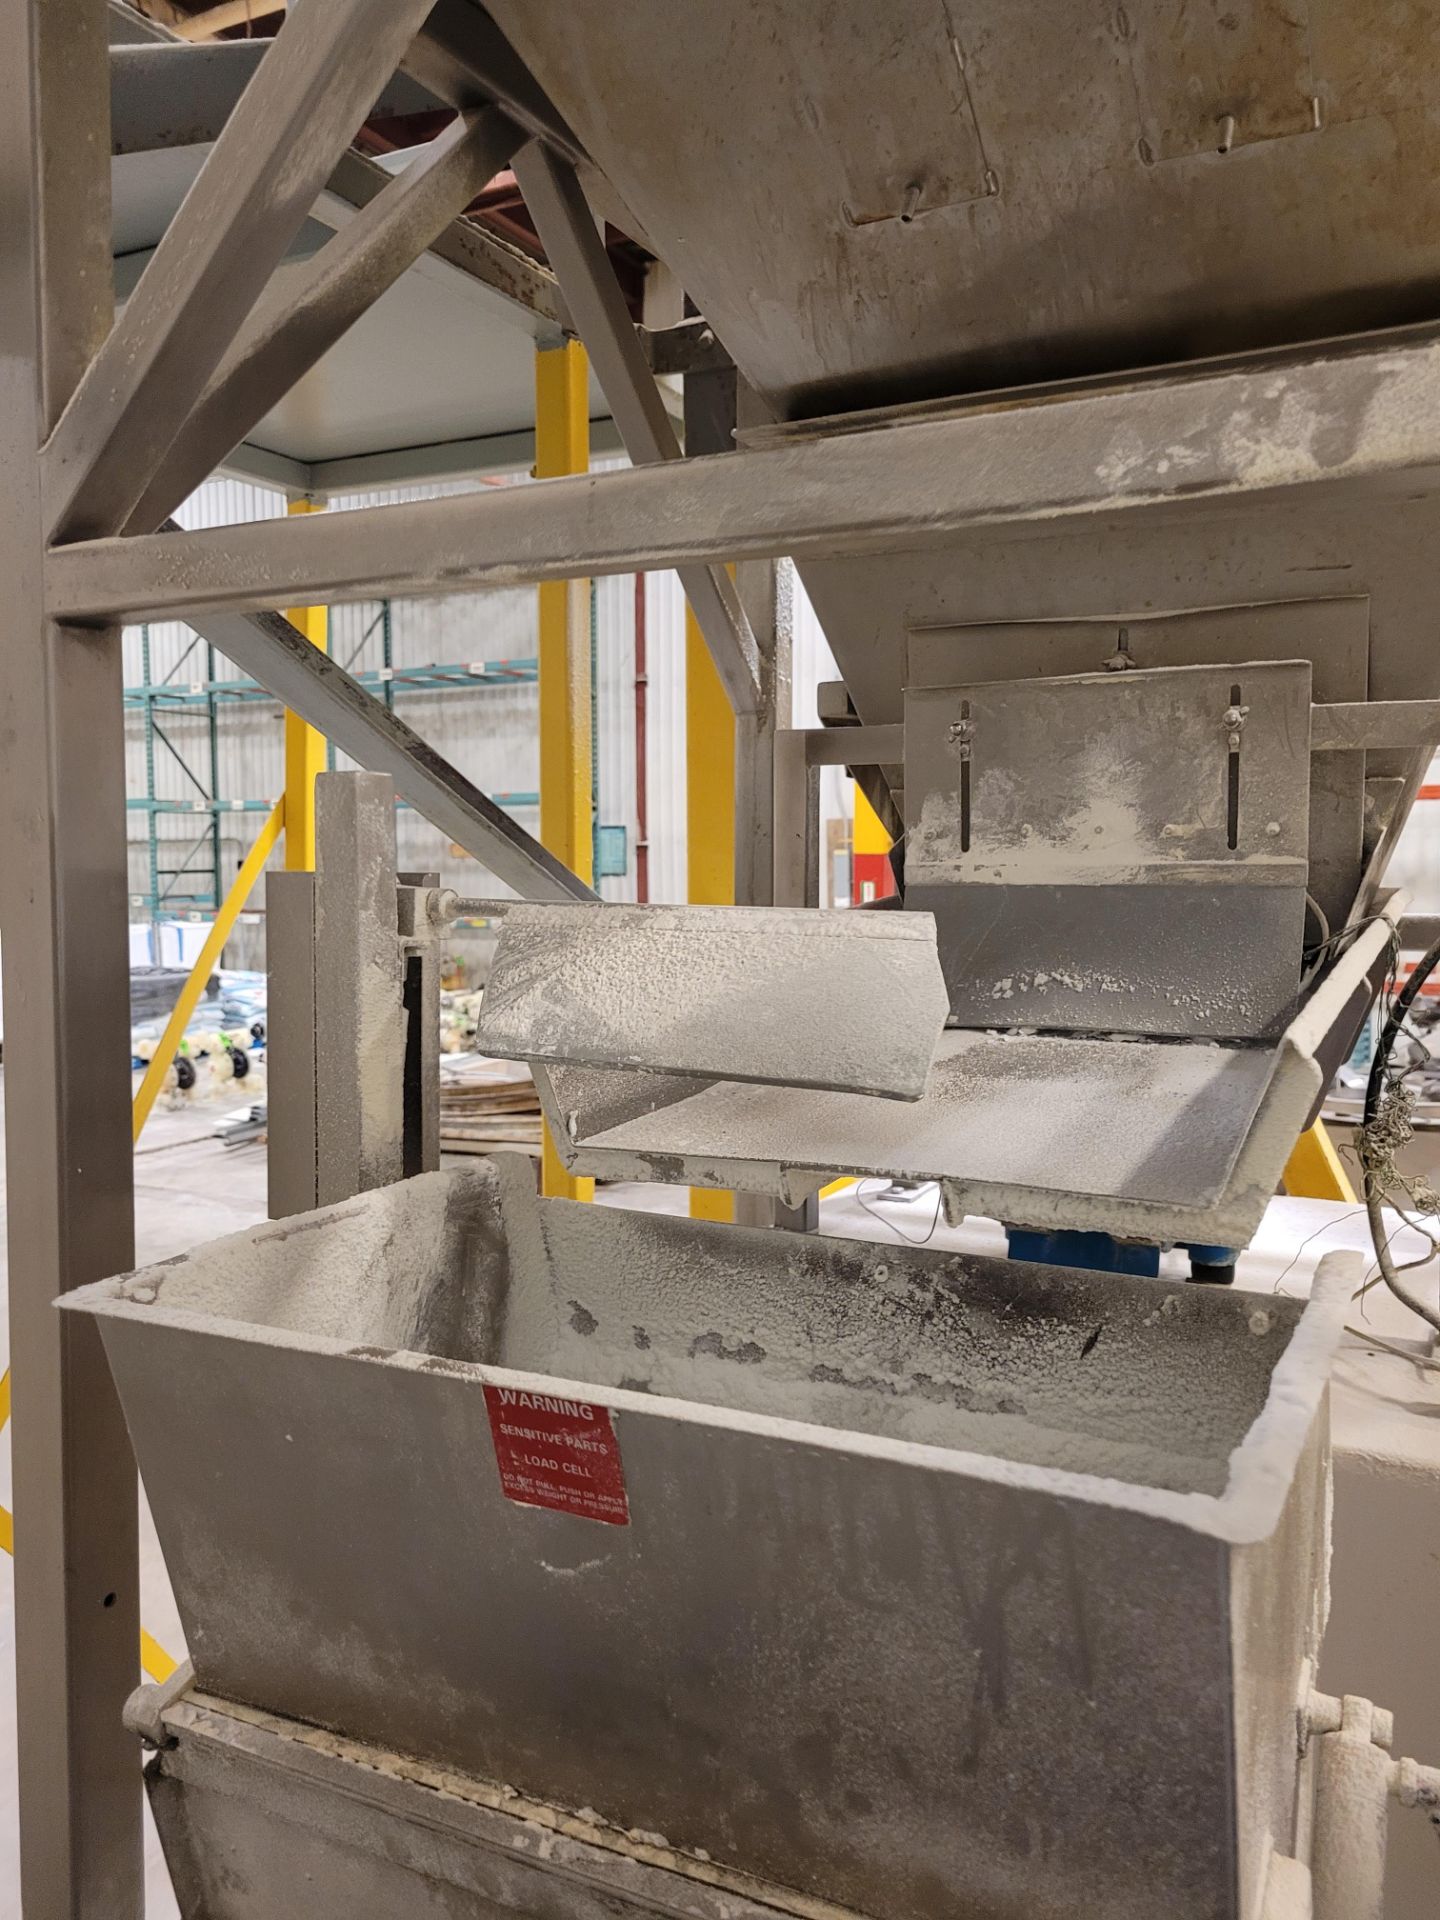 WEIGHPACK Multi-Trix Scale Filler machine mod. AEF-15, ser. 1331 with steel support frame - Image 3 of 25